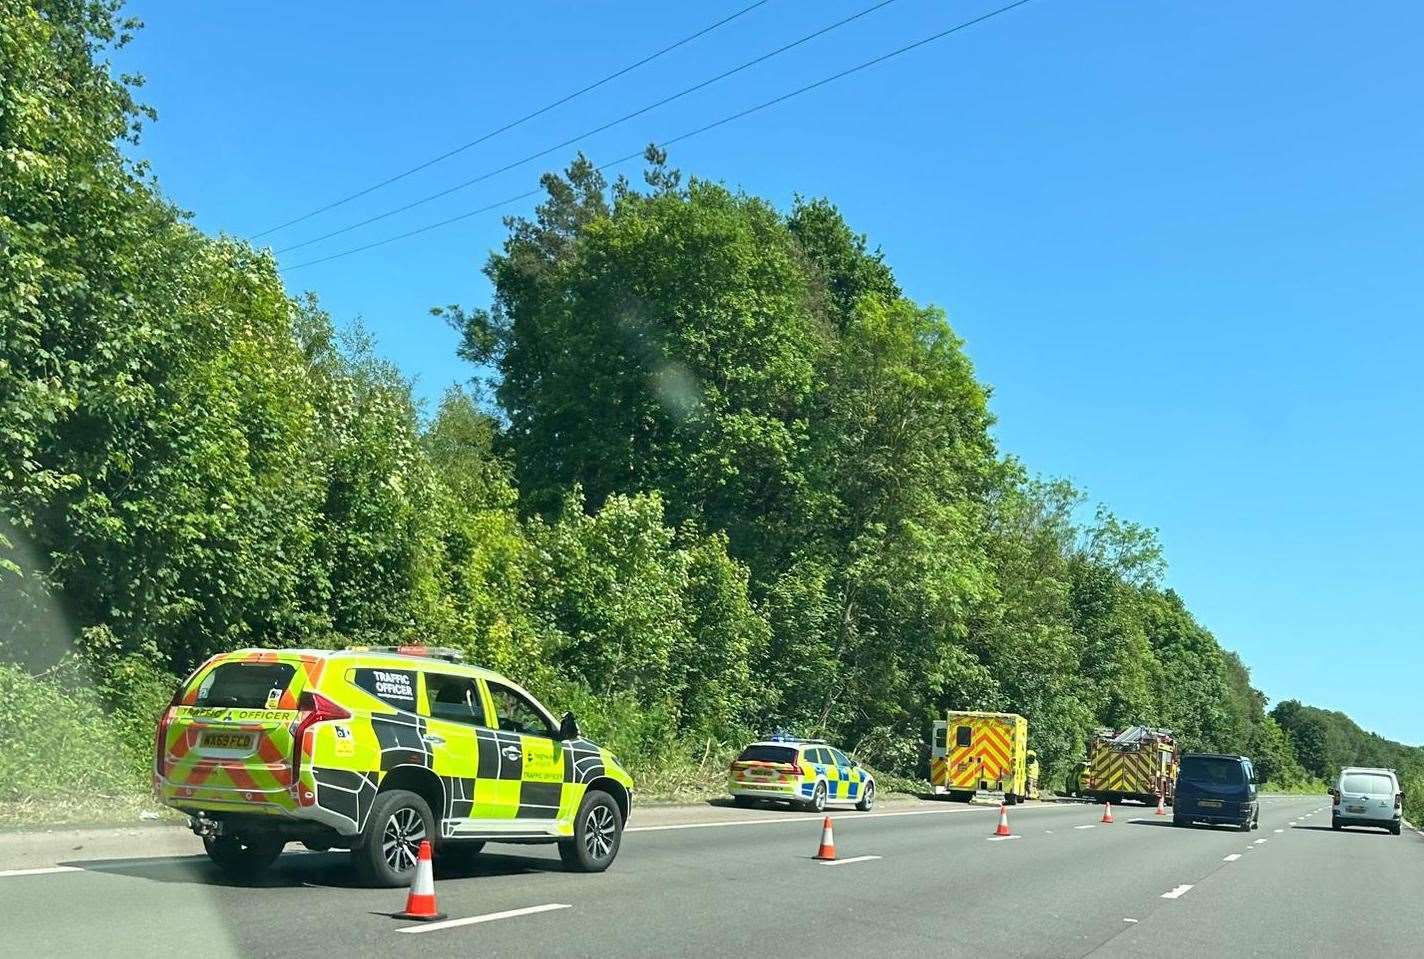 Emergency services have closed one lane on the M20 near Ashford due to a car leaving the carriageway